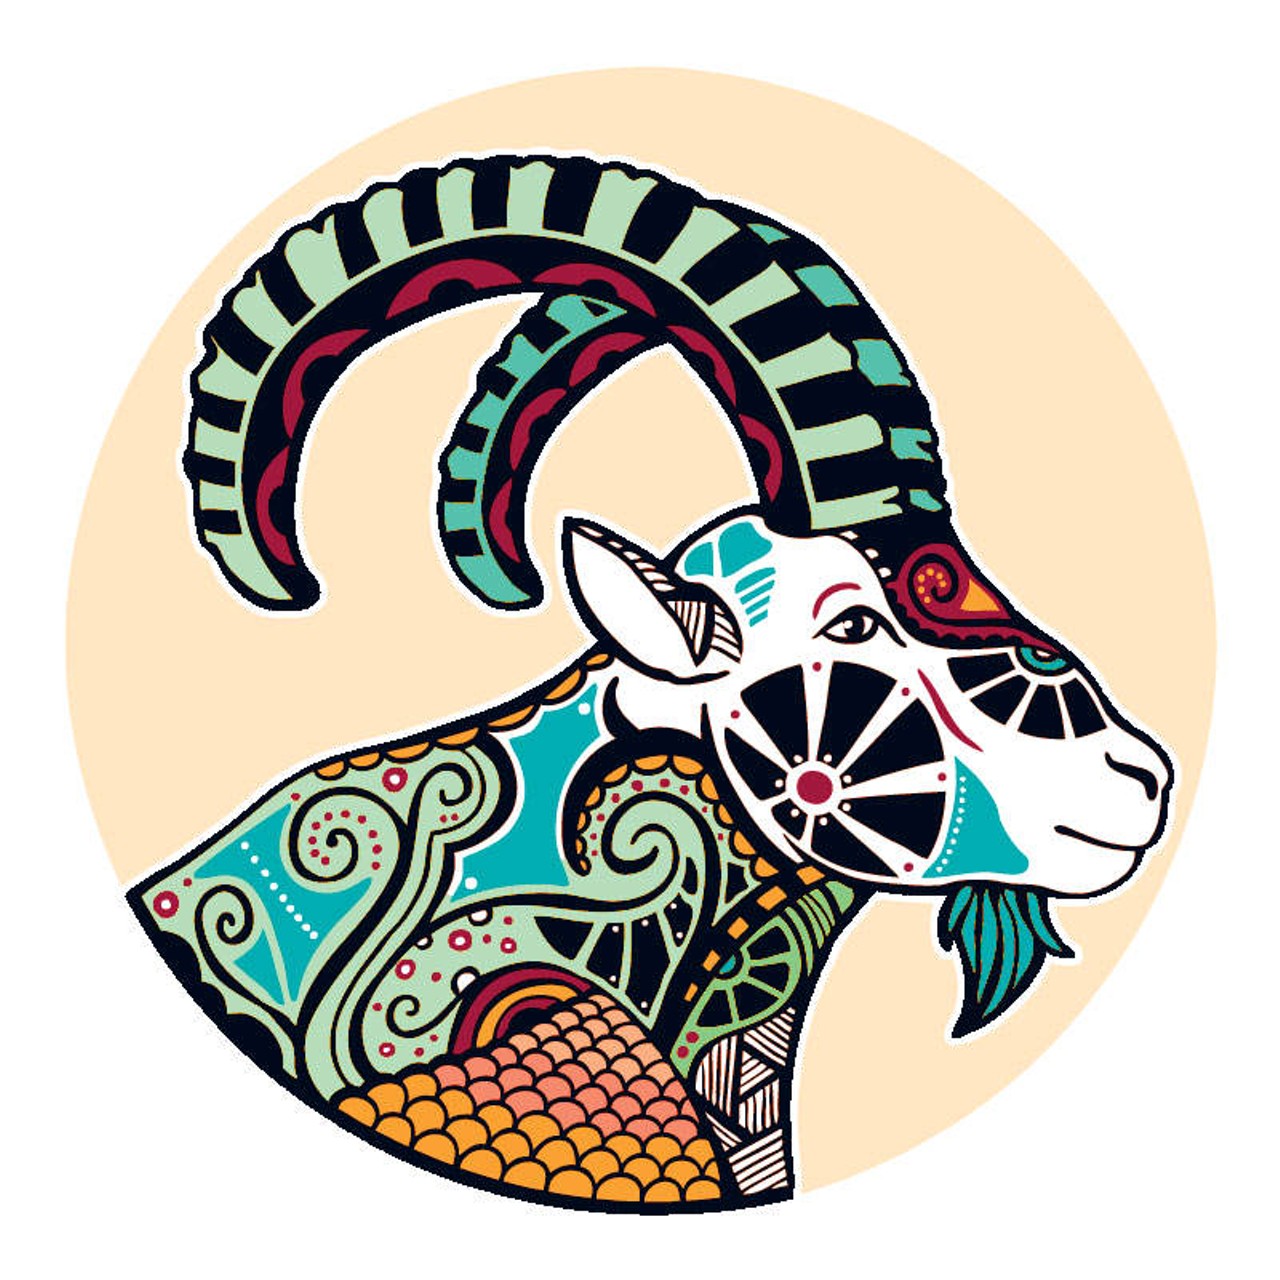 CAPRICORN (Dec. 21-Jan. 20): 
The way things are going you could easily take off like a rocket. Lots of super supportive energy is there for those of you who are ready to get over yourselves and let go. For many, the act of moving on up will feel gut-wrenching, or stressful enough to make you feel like your life depends upon hanging on as tight as you can. It&#146;s not my job to tell you how to approach things; we all have good reasons for hanging on or letting go. Part of me wishes I had the right to tell you that it&#146;s safe to surrender and open your life to reflect the faith and trust that you hold in it.